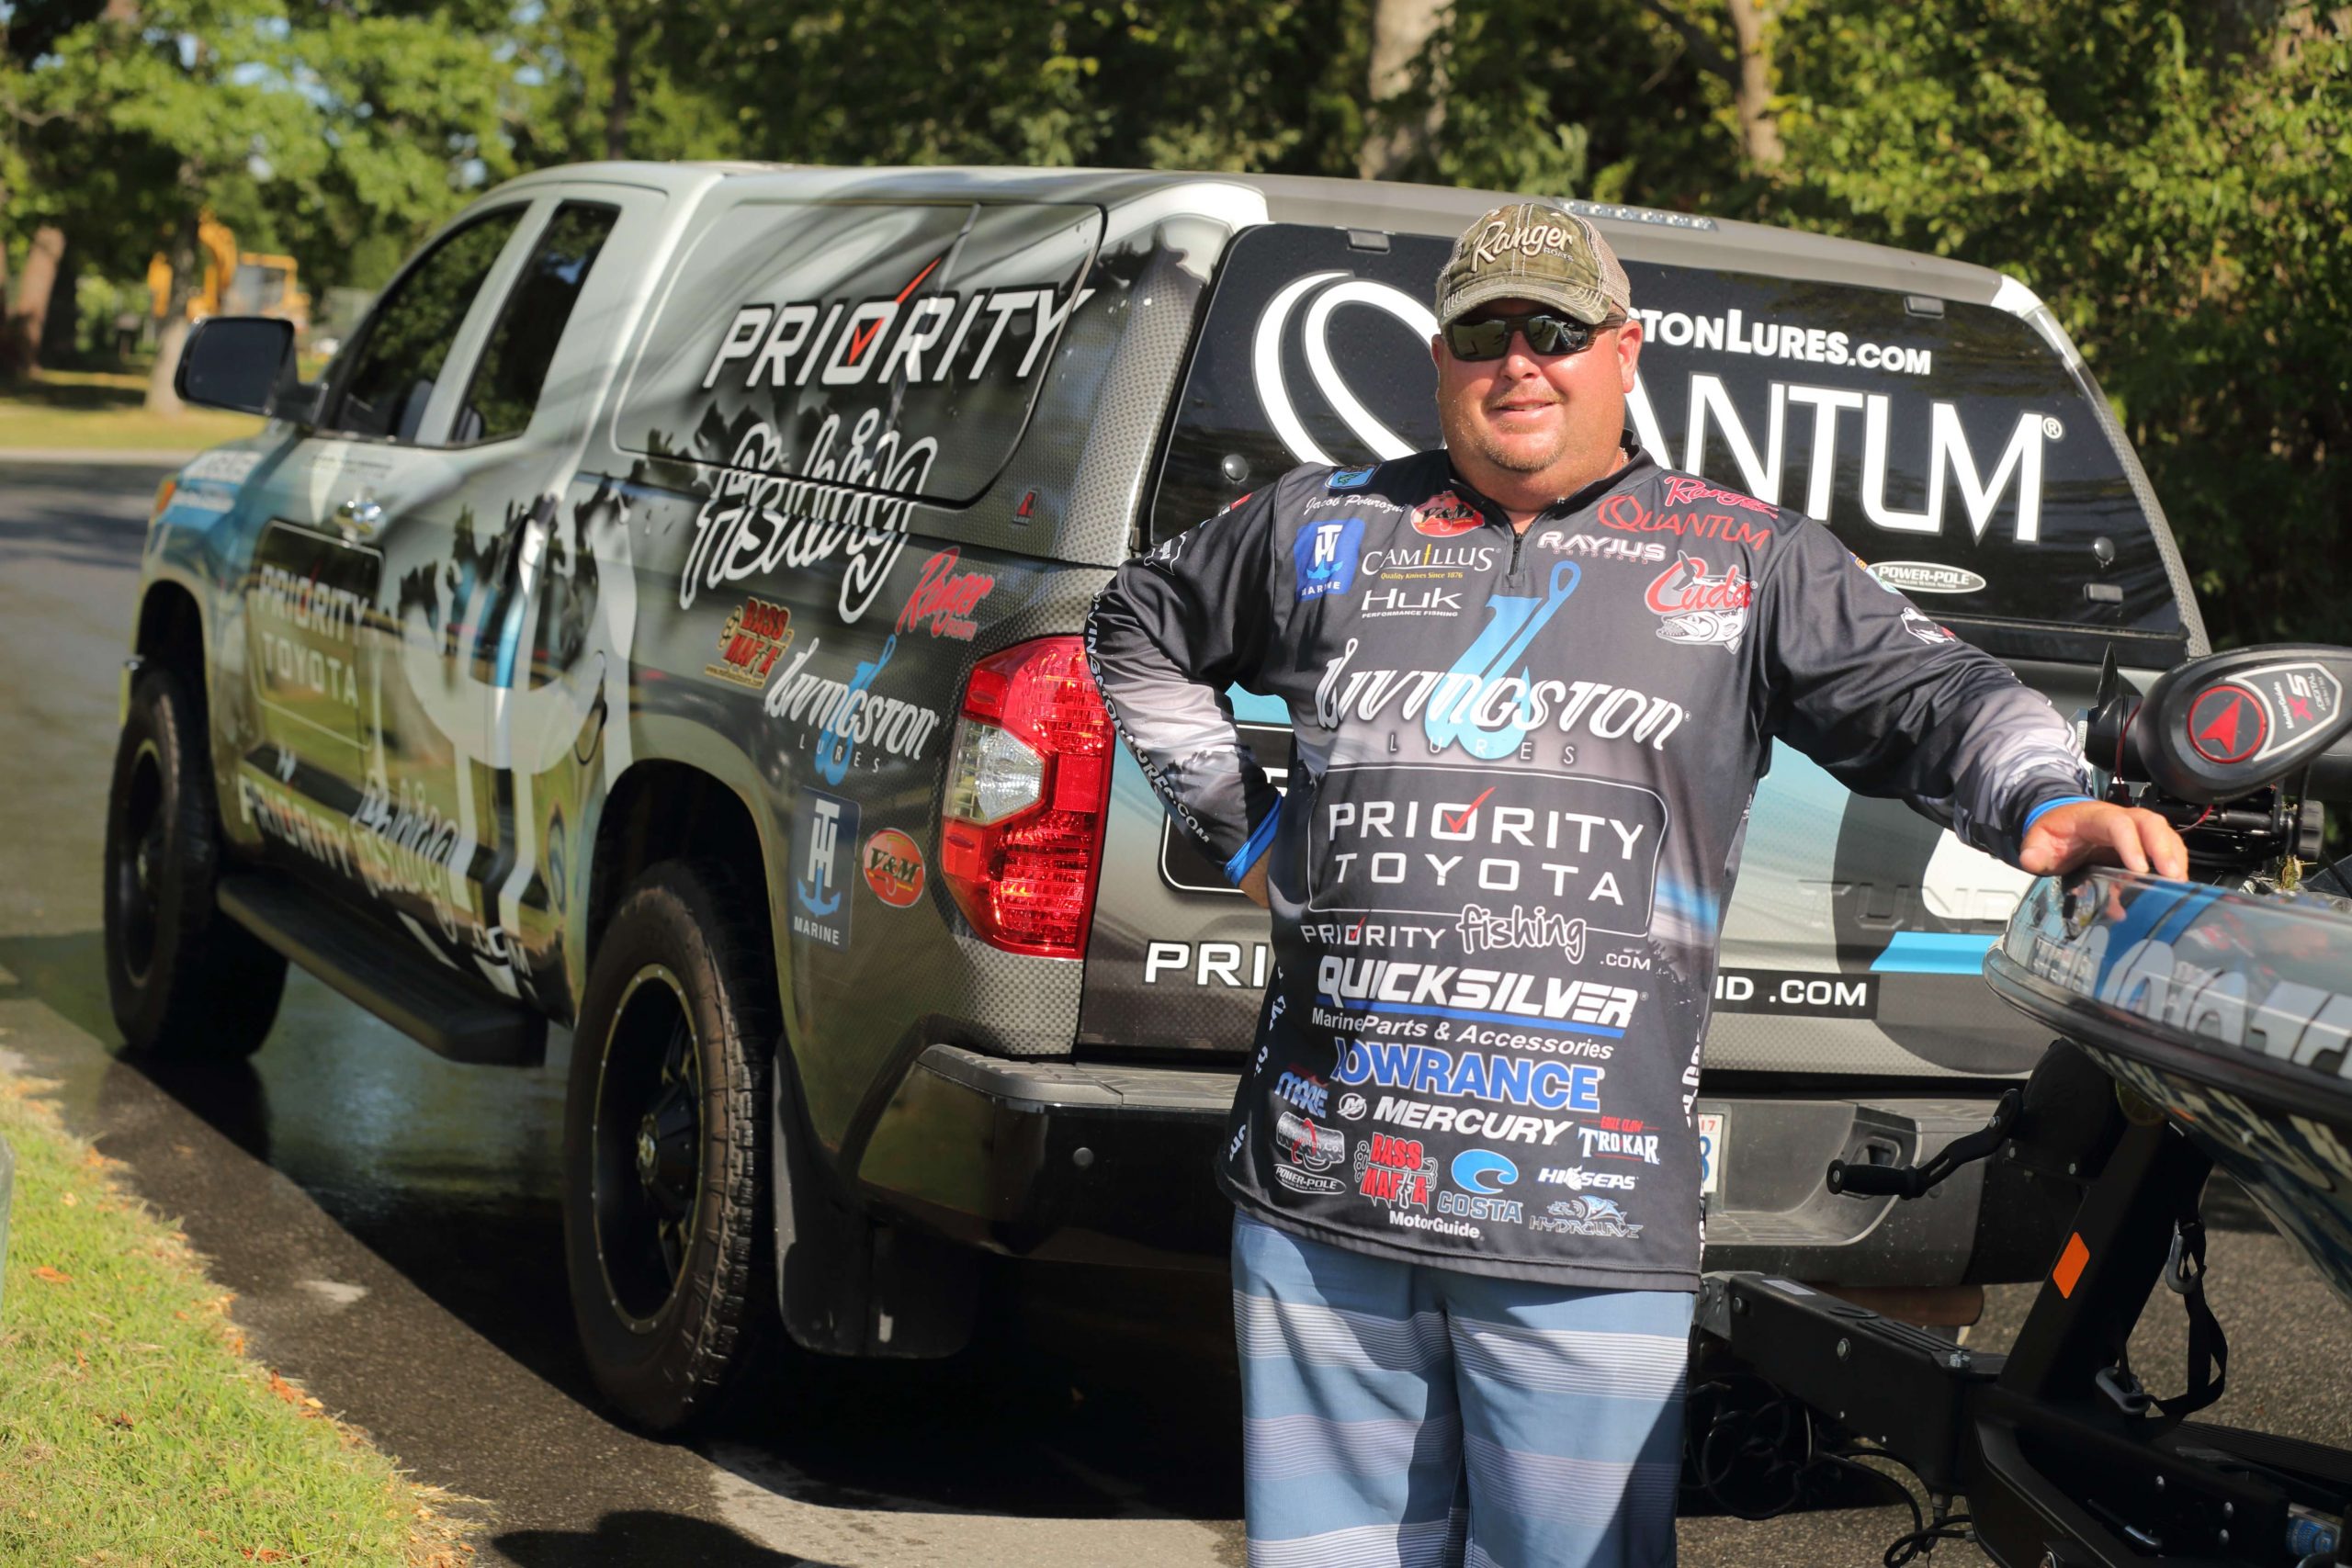 In a year, Powroznik puts about 28,000 miles on his Tundra, and he is often mistaken for a racing driver. âWeâll be pulling a bass boat, right at a lake, and people will ask âWhen does the race startâ,â Powroznik said. âIt happens at least three times on the road for every tournament.â 